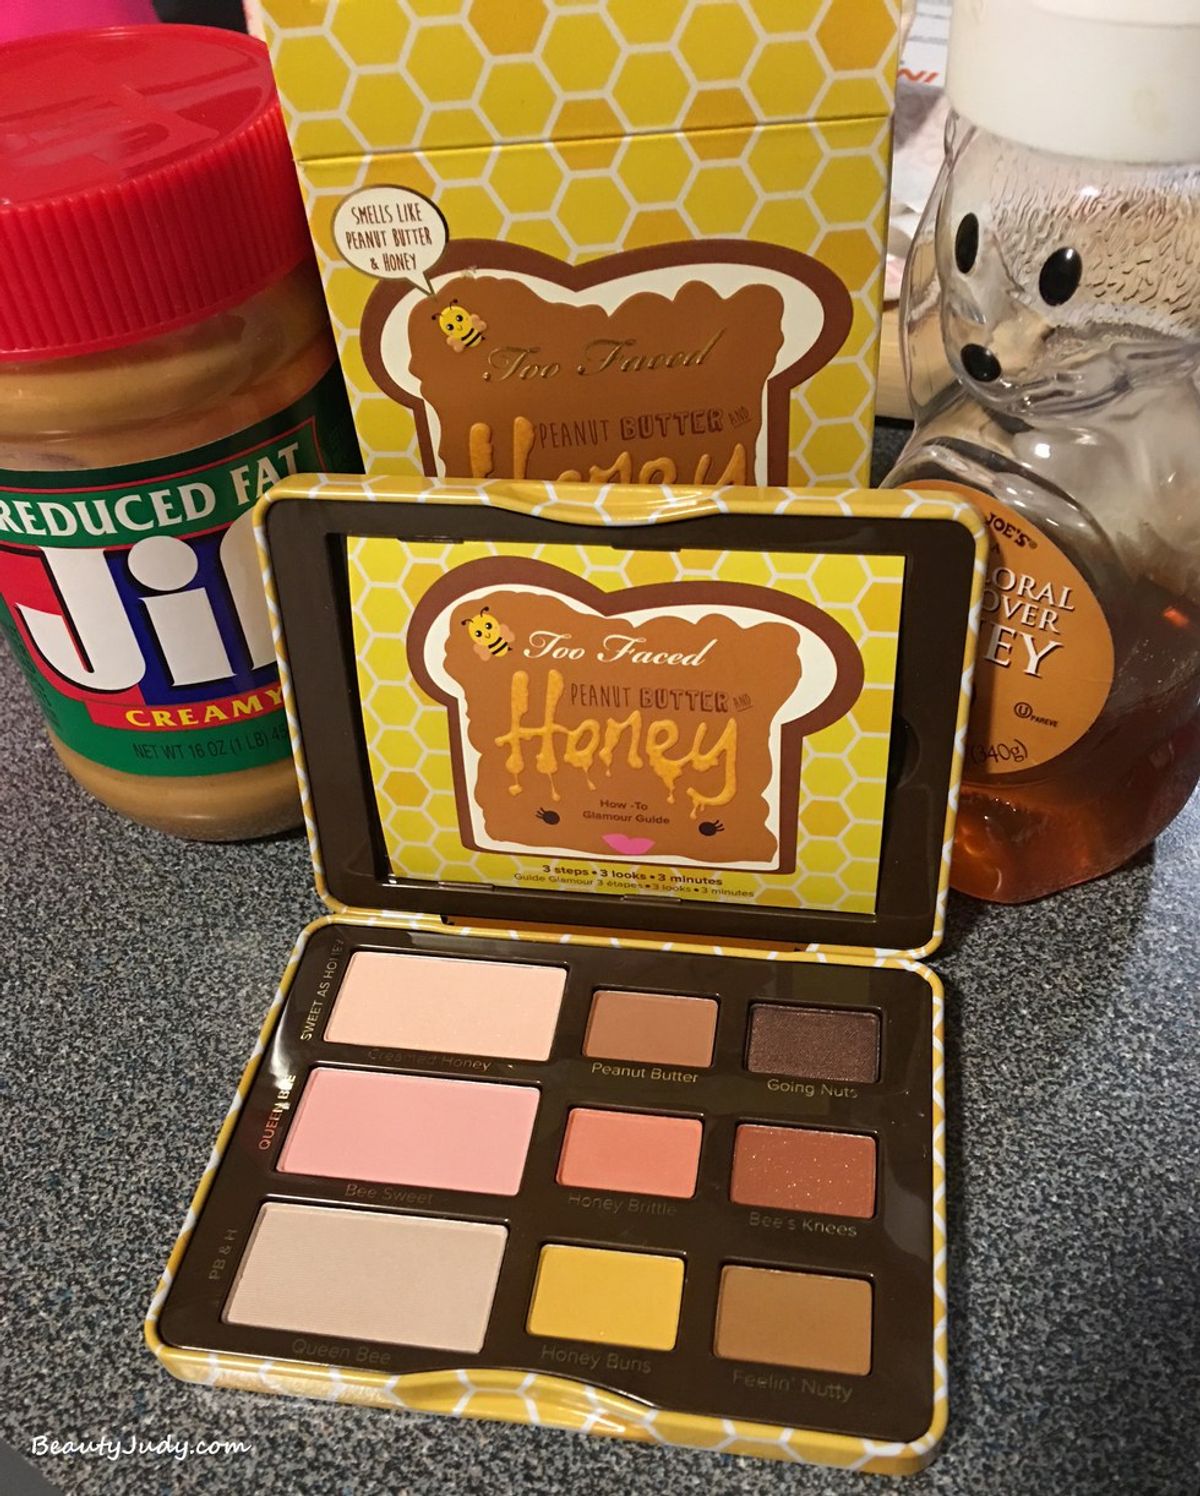 Opinion: Too Faced Cosmetics Should Donate Proceeds to Saving the Bees